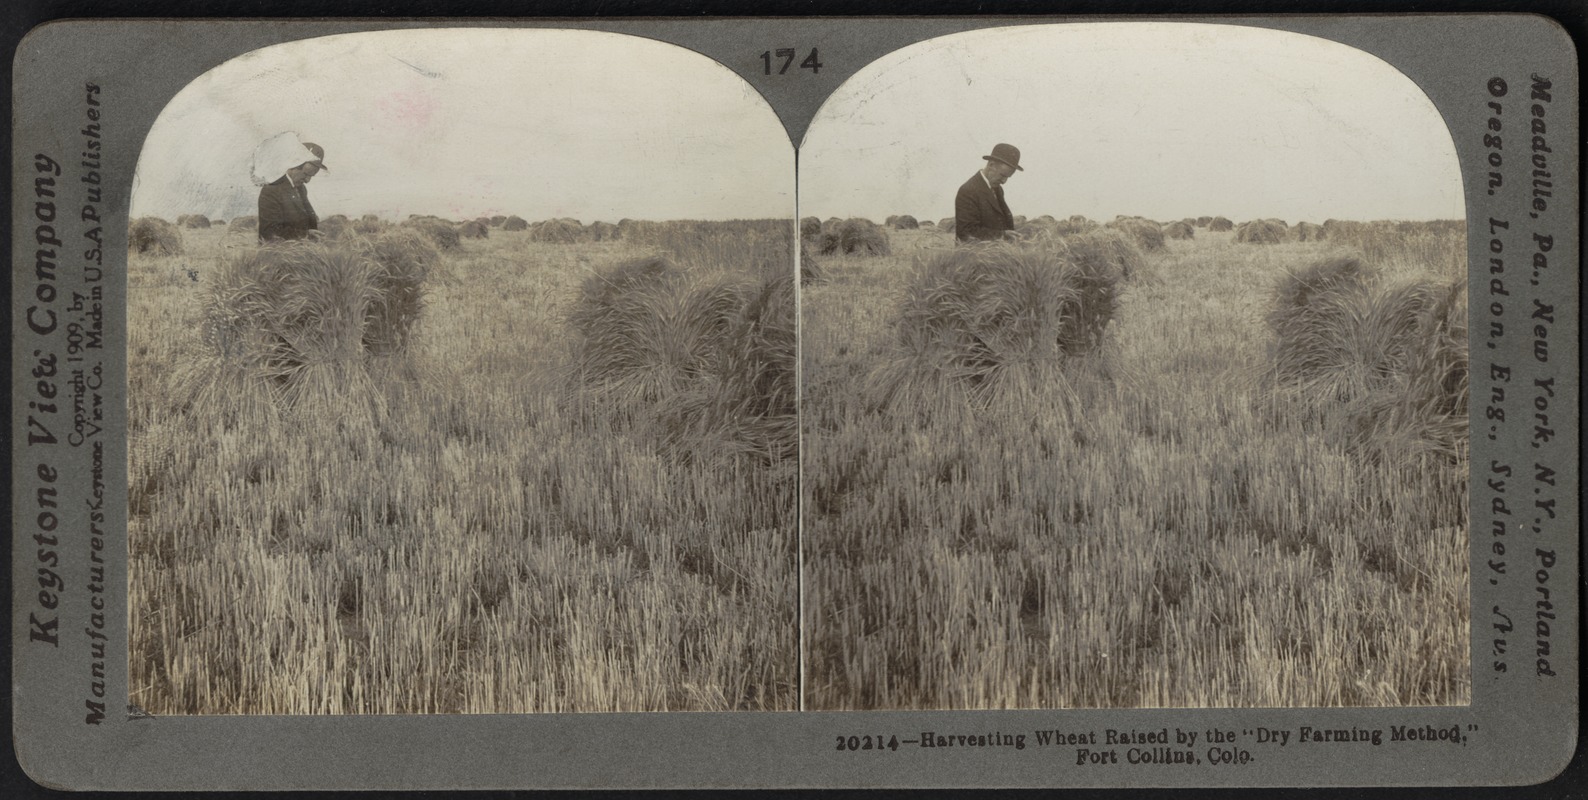 Harvesting wheat raised by the "dry farming method," Fort Collins, Colo.